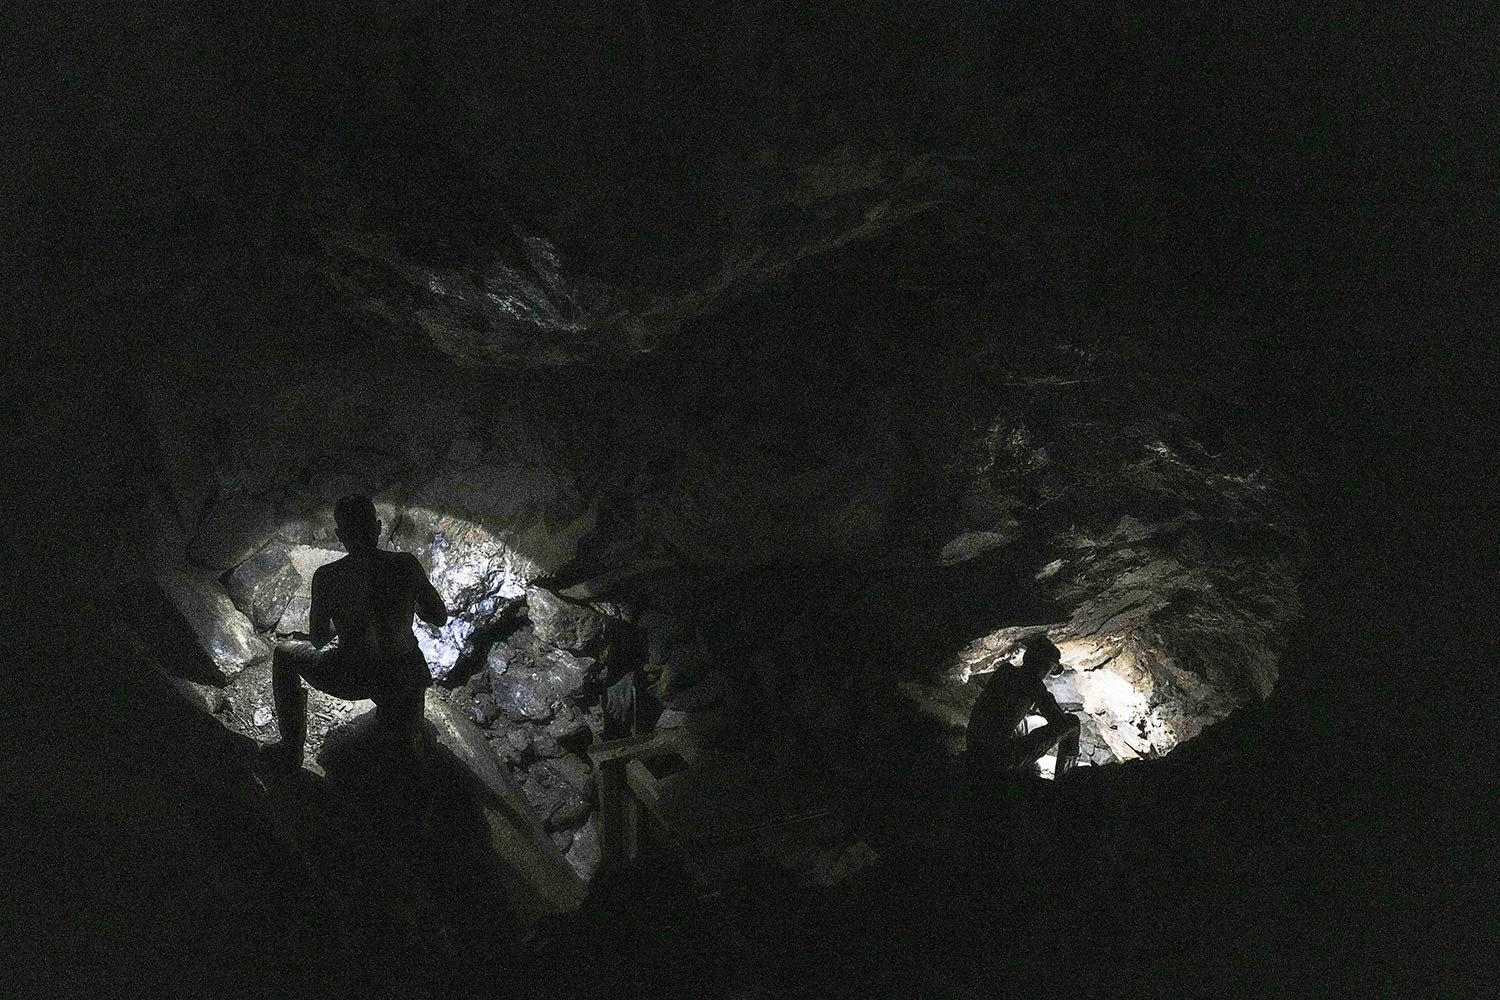  Gold miners work at an underground mine in El Callao, Bolivar state, Venezuela, April 28, 2023. Operators use dynamite to loosen rocks below the surface, where workers descend to work in high heat with no safety gear. (AP Photo/Matias Delacroix) 